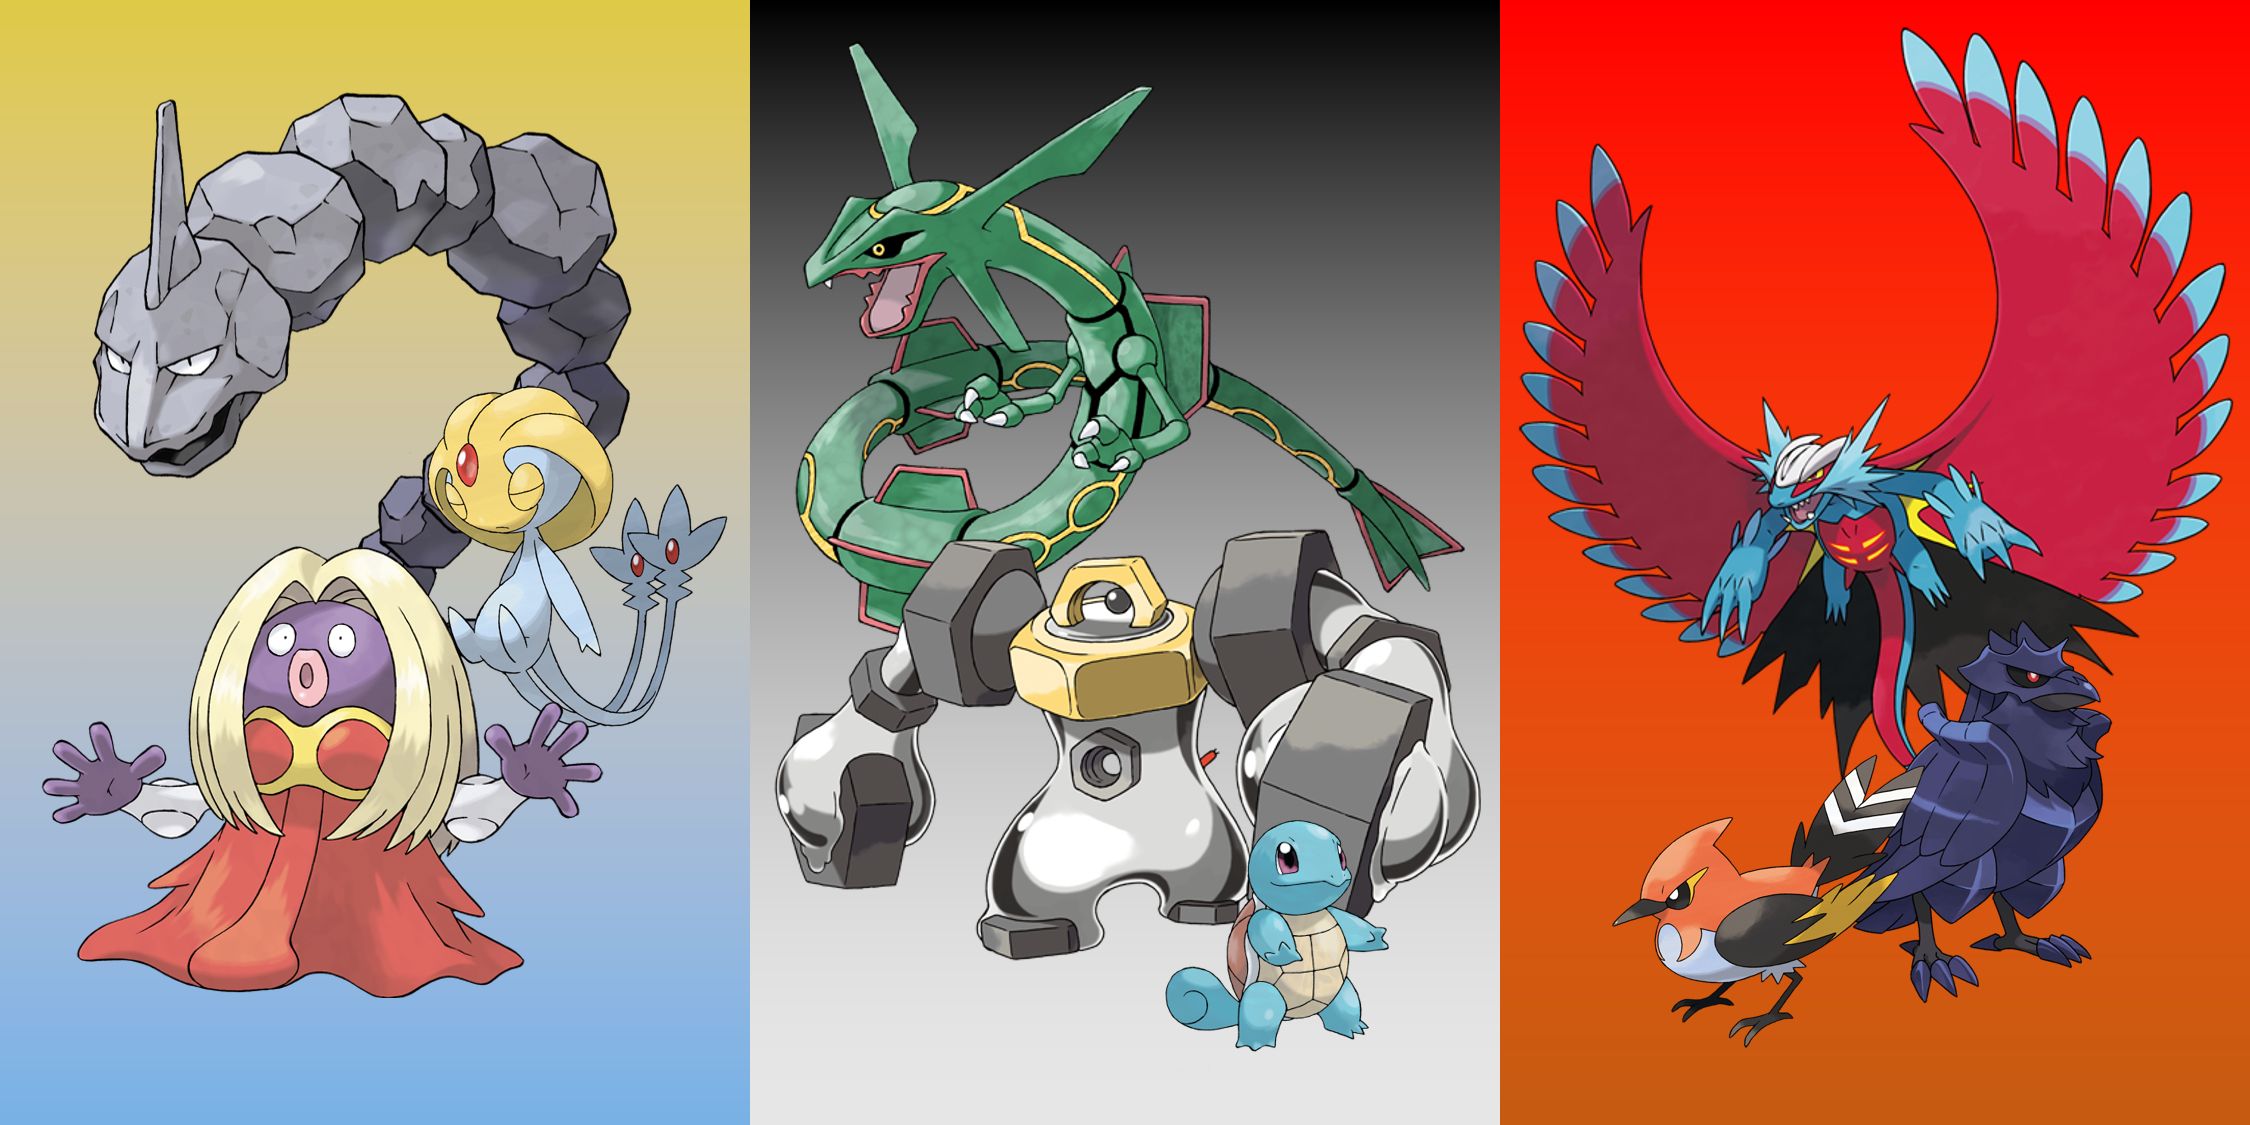 shortest and longest names pokemon; onix uxie jynx; rayquaza melmetal squirtle; roaring moon fletchinder corviknight